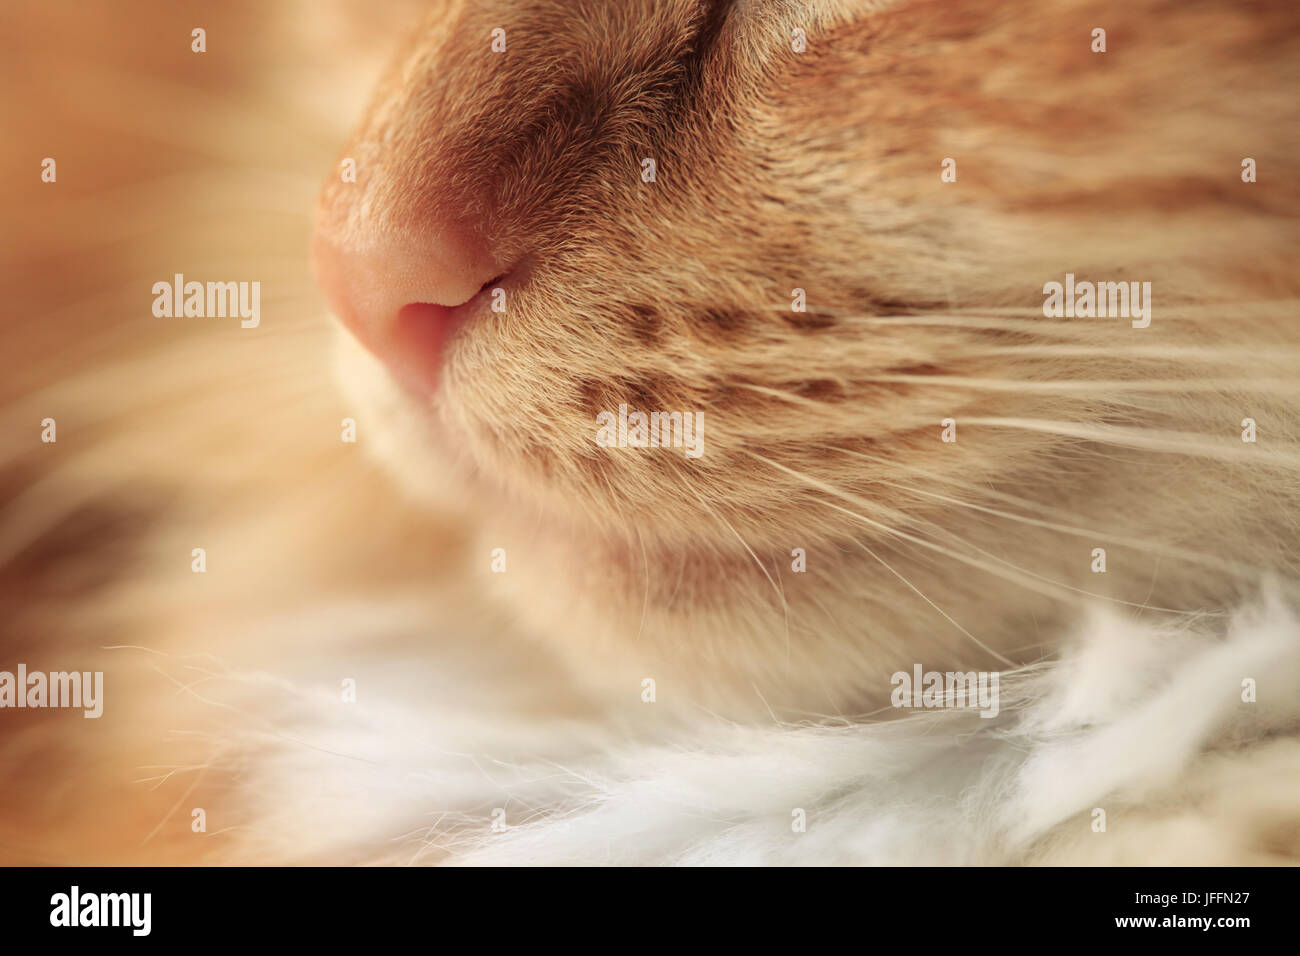 Close-up of a nose of a red cat Stock Photo